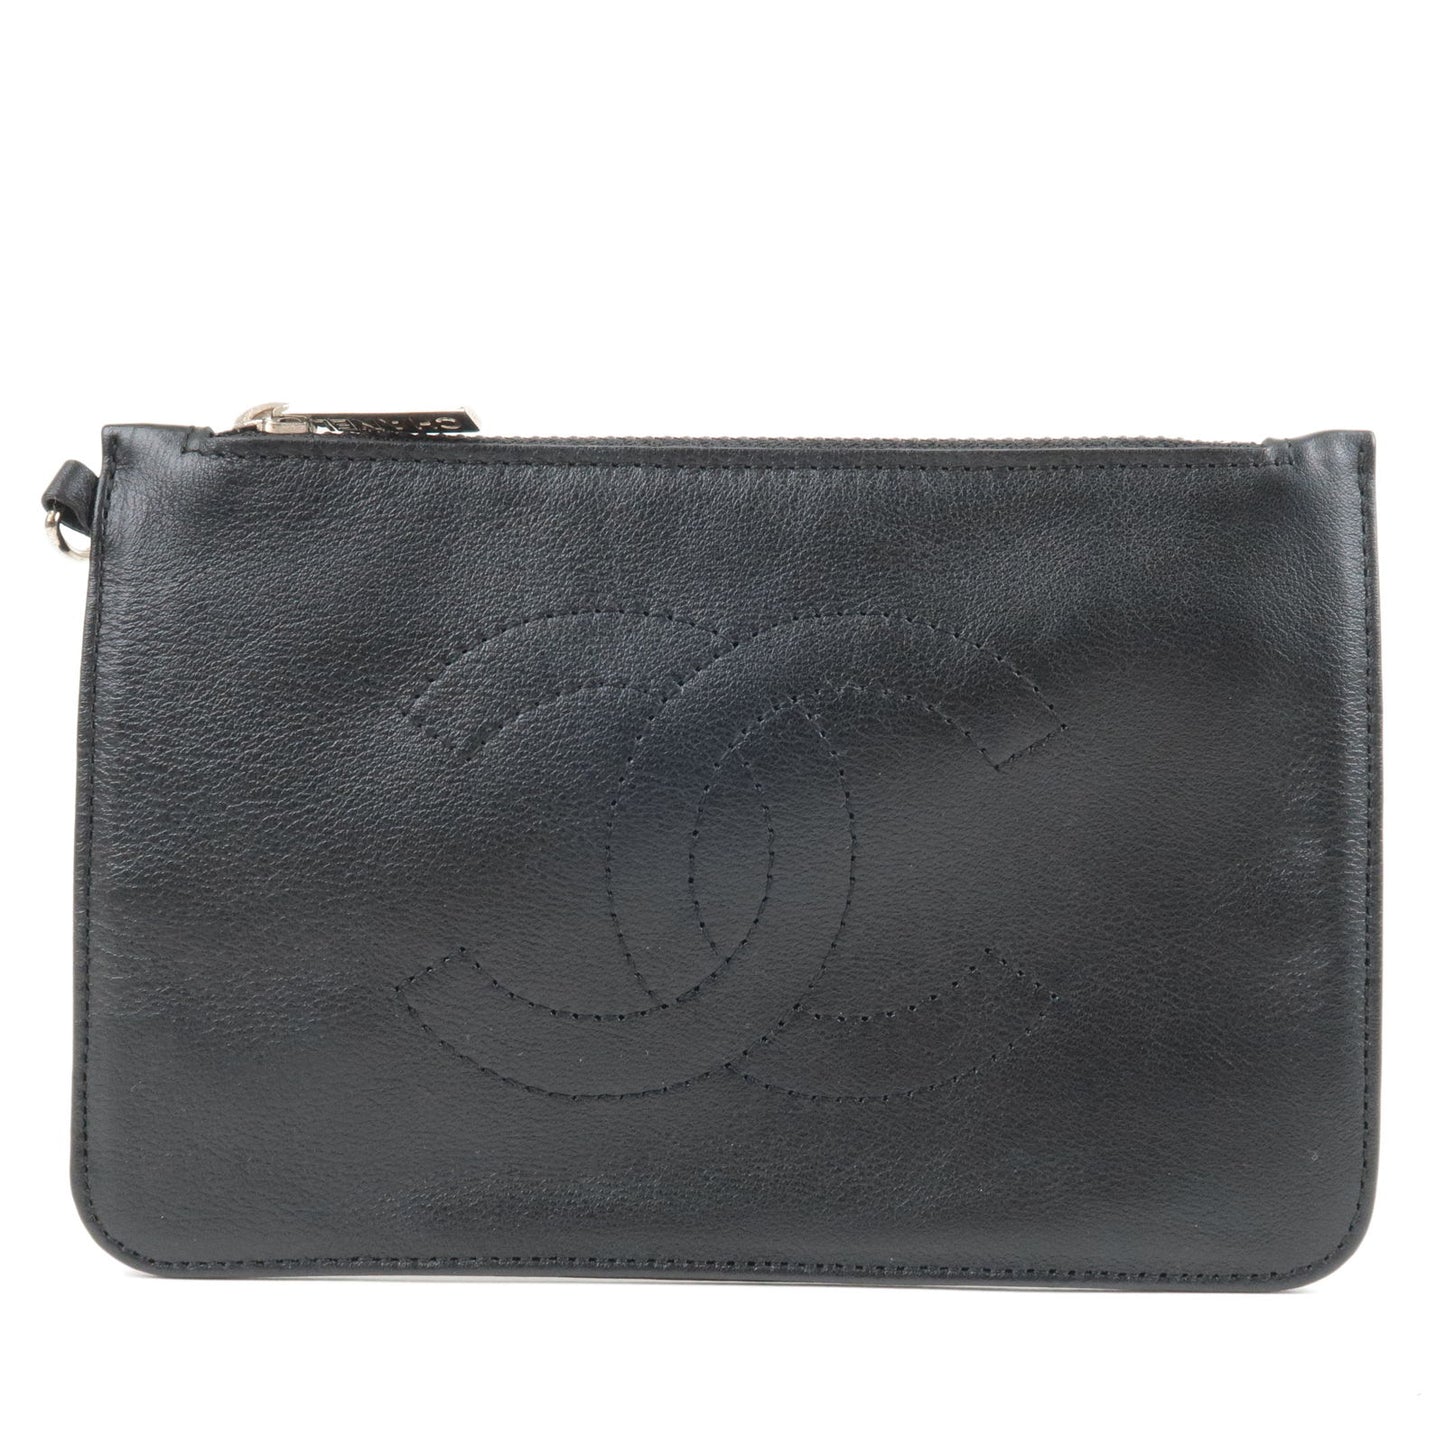 CHANEL-Coco-Mark-Leather-Cosmetic-Small-Pouch-Black